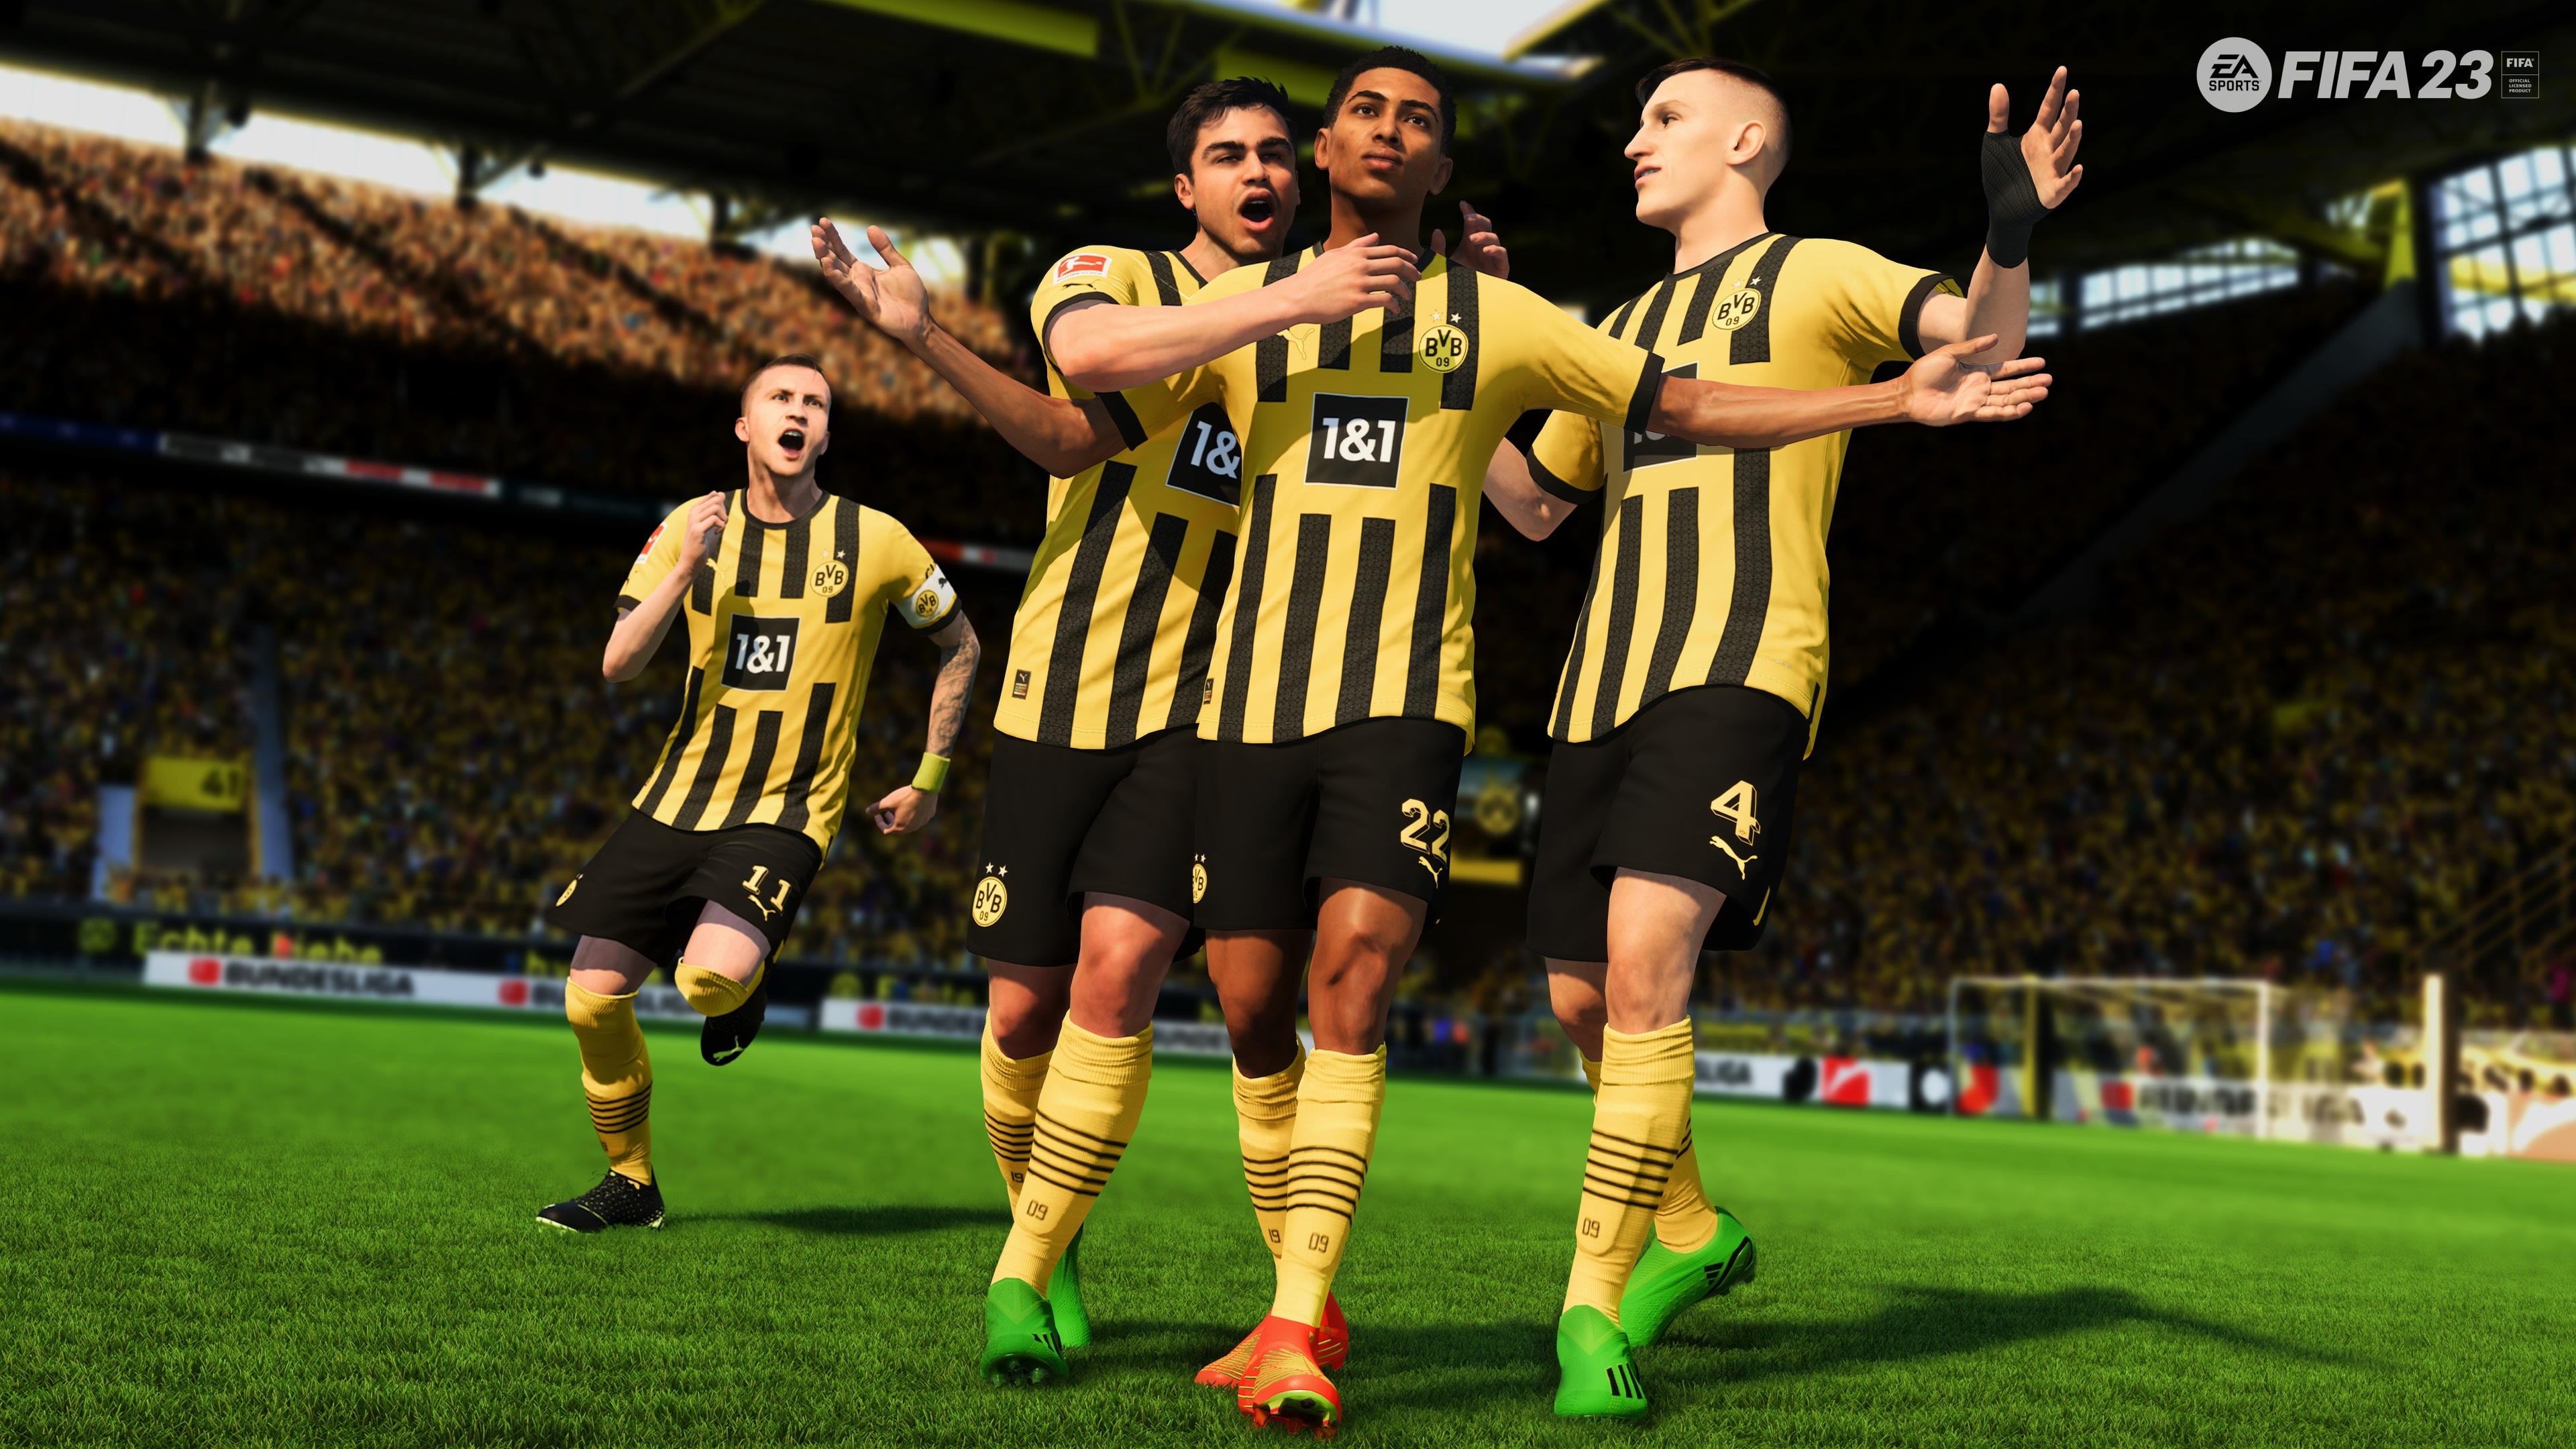 Video Game FIFA 23 HD Wallpaper | Background Image